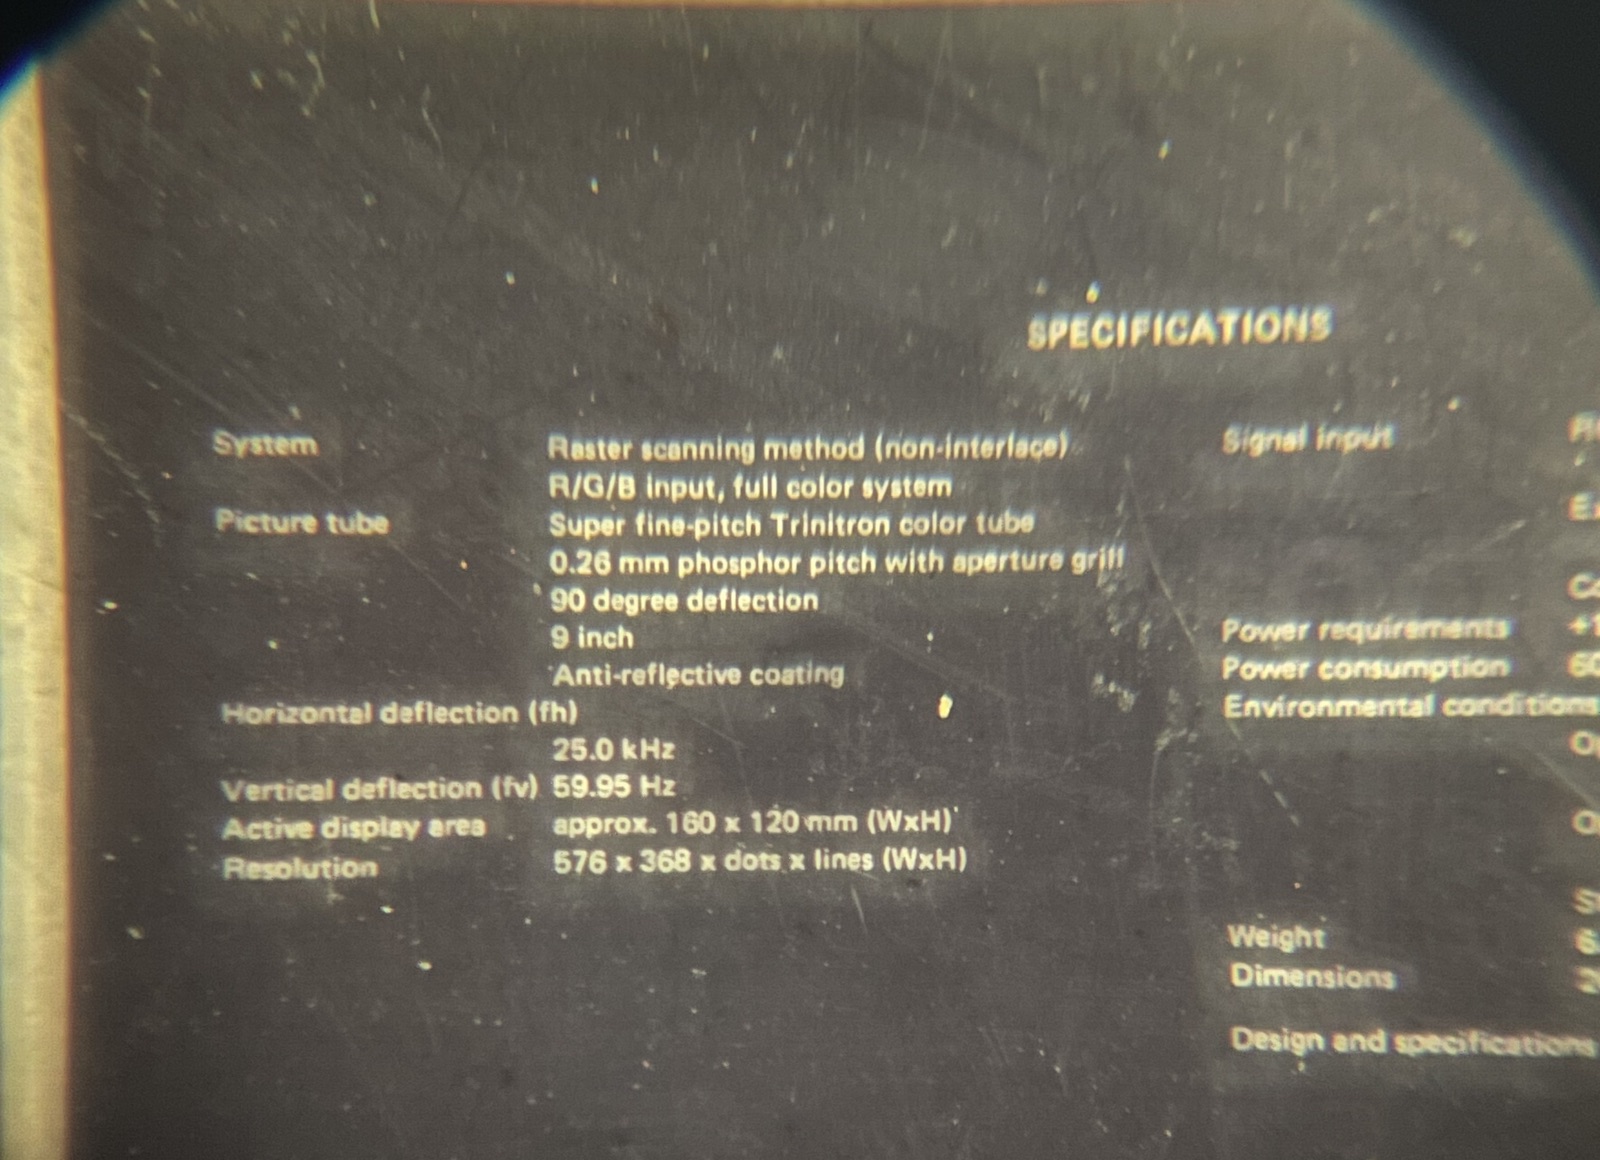 Specifications under the microscope